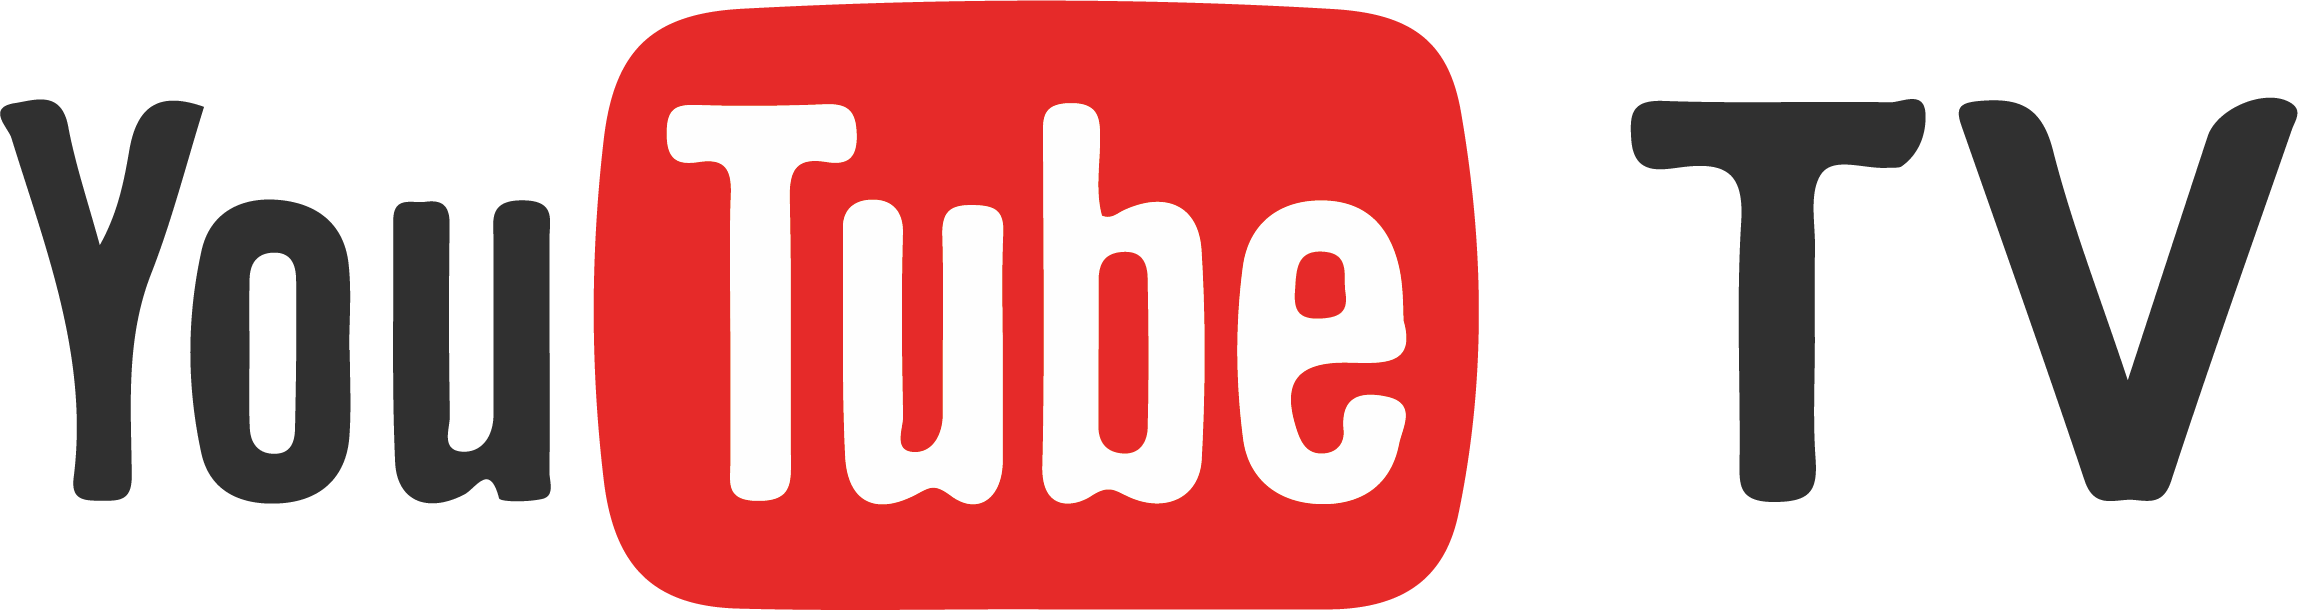 Youtube Tv Channels Lineup And Packages